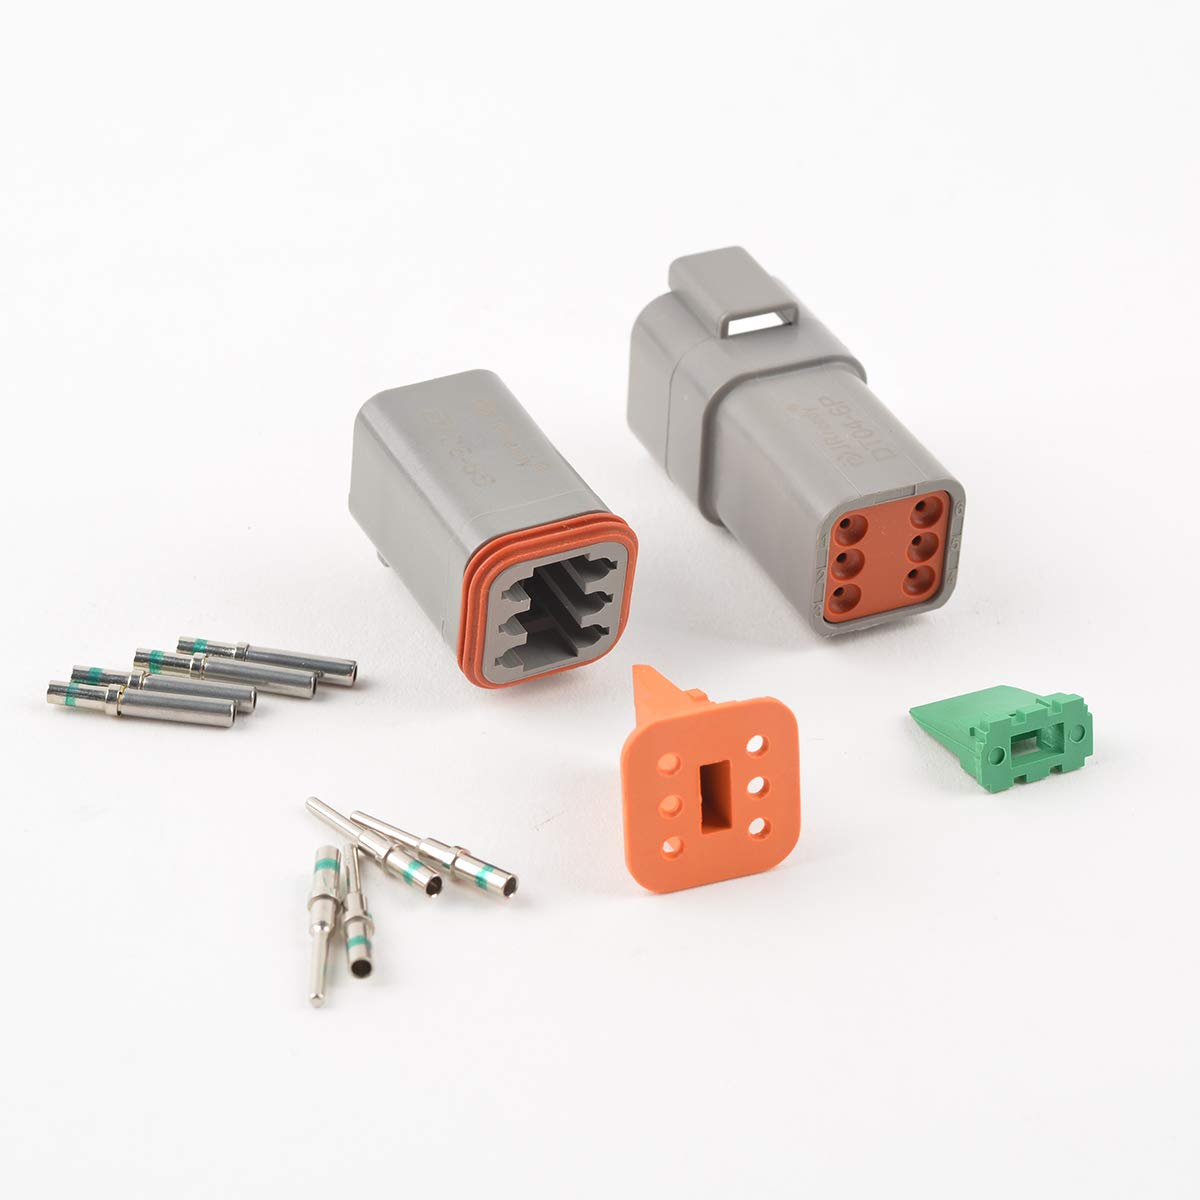 JRready ST6115 DT 6 Pin Gray Waterproof Connectors with 16# Contact 14-16AWG & Seal Plug, 3 Pairs